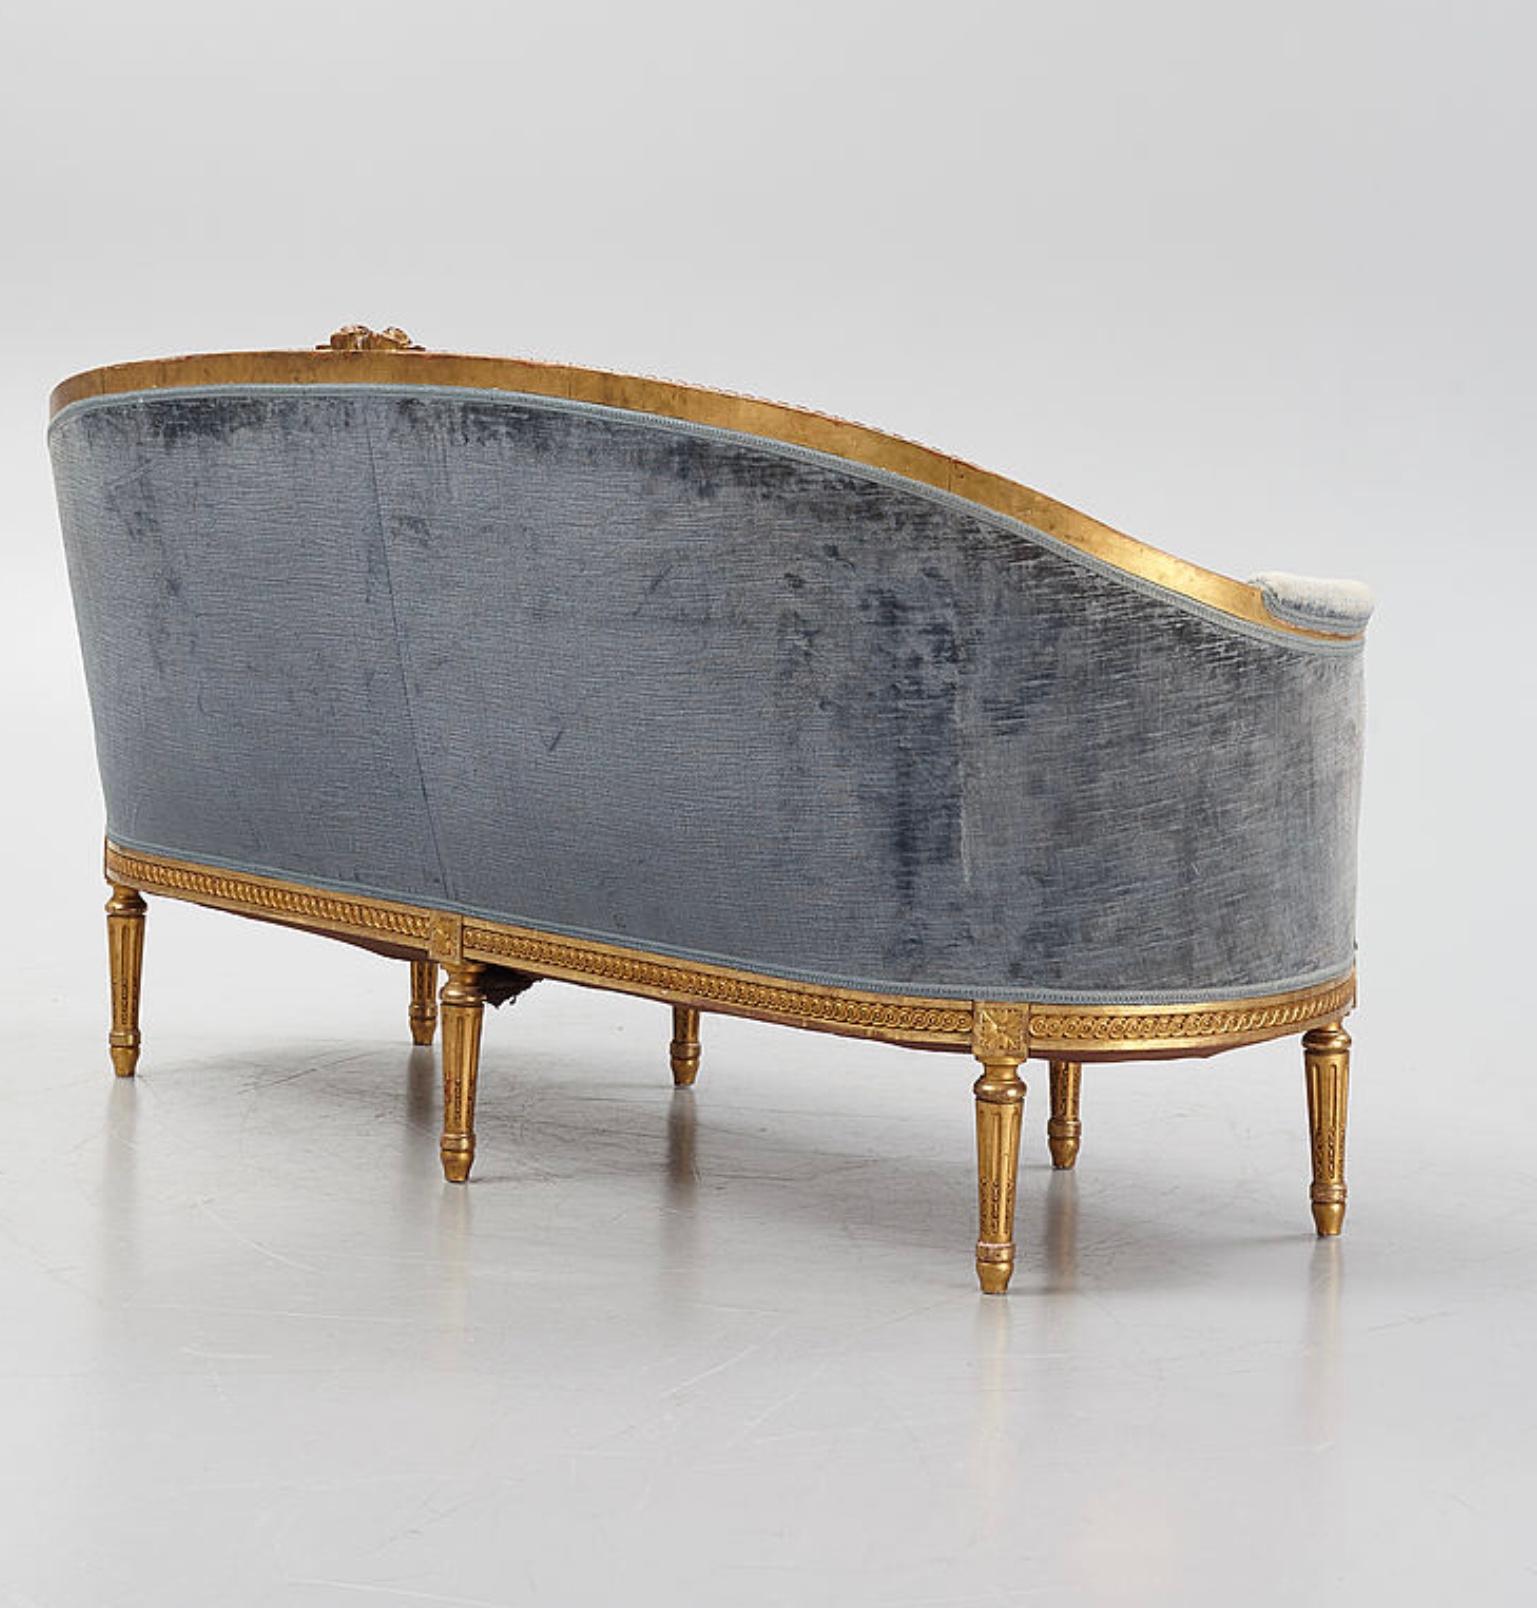 Early 20th Century 1900s Swedish Two-Seater Gustavian Style Gilt Velvet Sofa with Carved Decoration